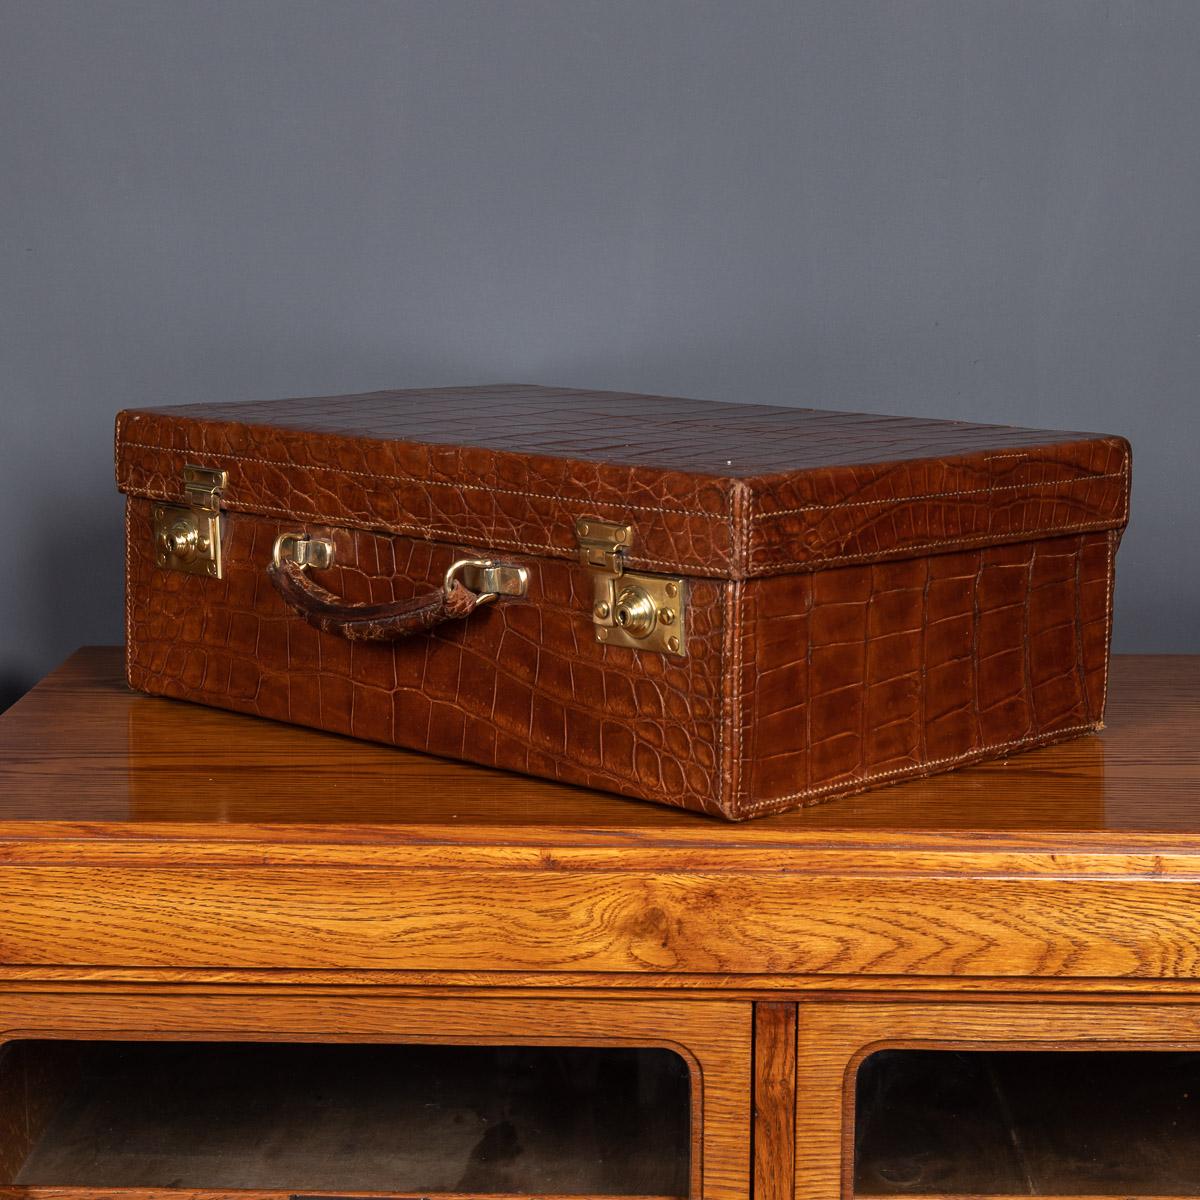 Antique early-20th century crocodile overnight travel case, made by Drew & Sons, by Royal Appointment to the Queen. The case is oozing style and elegance, this case makes for a fantastic conversation piece, a very practical item suitable for any